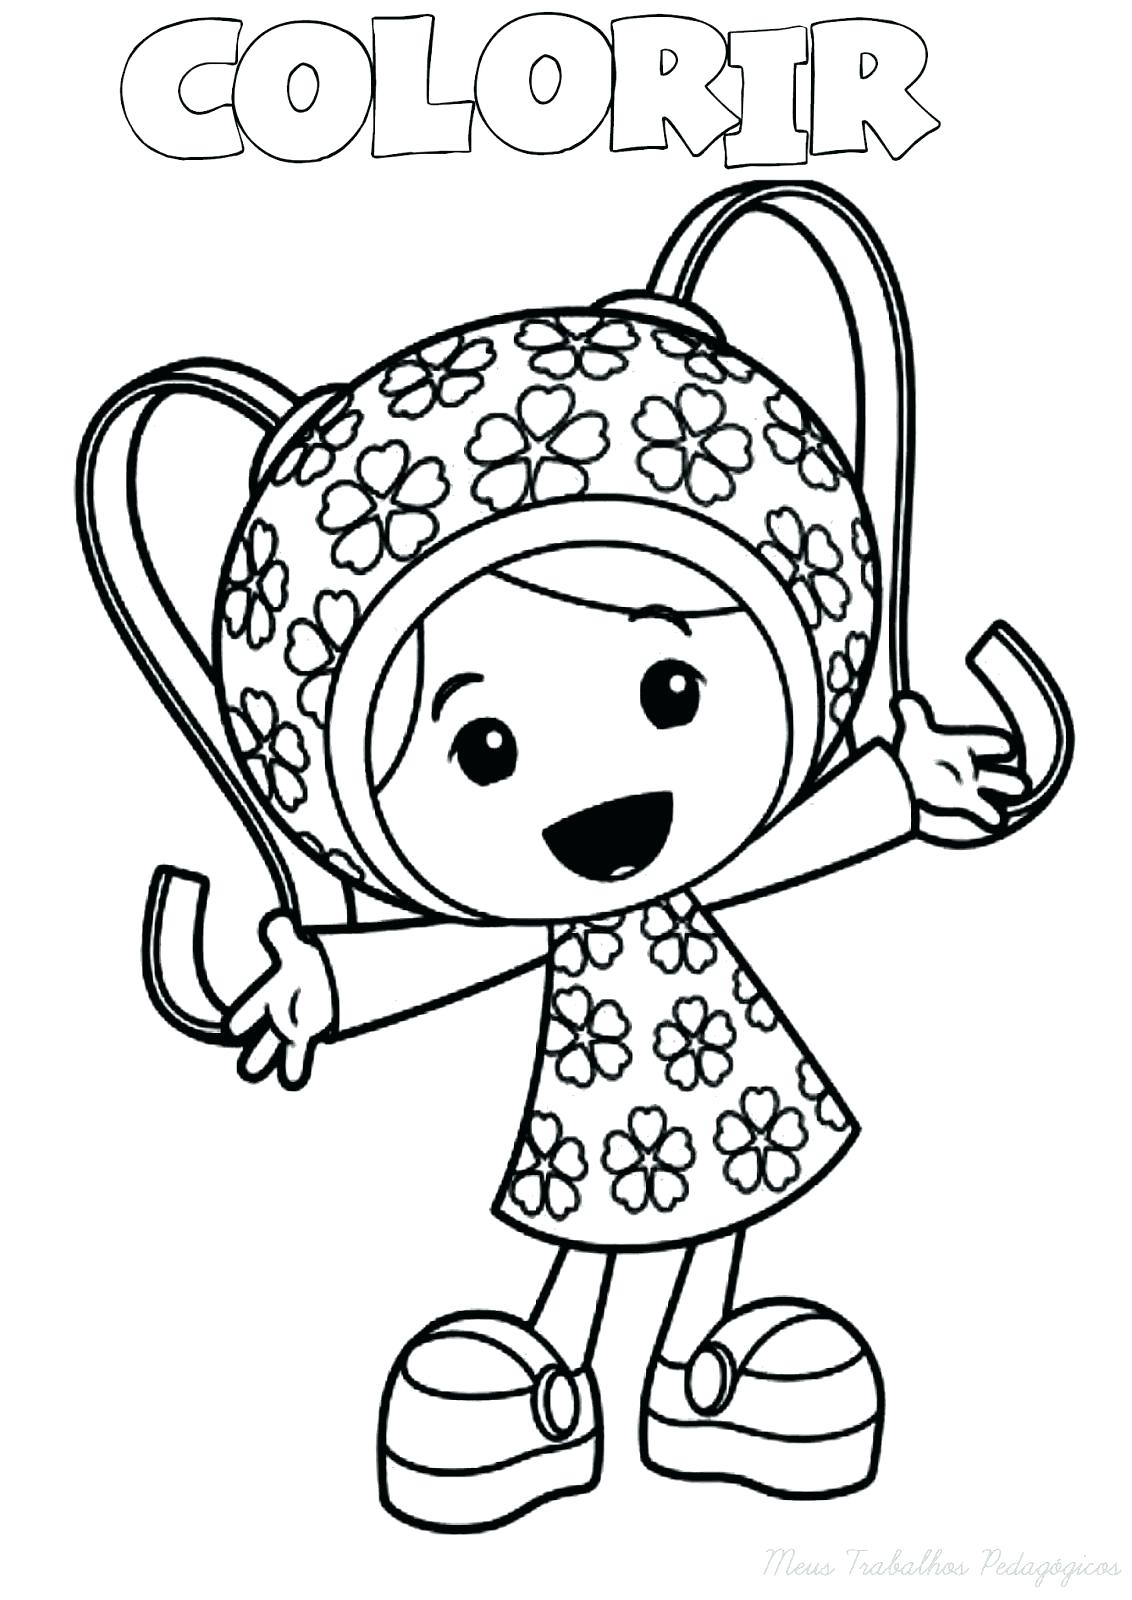 Nick Jr Coloring Book - Styles Suggest